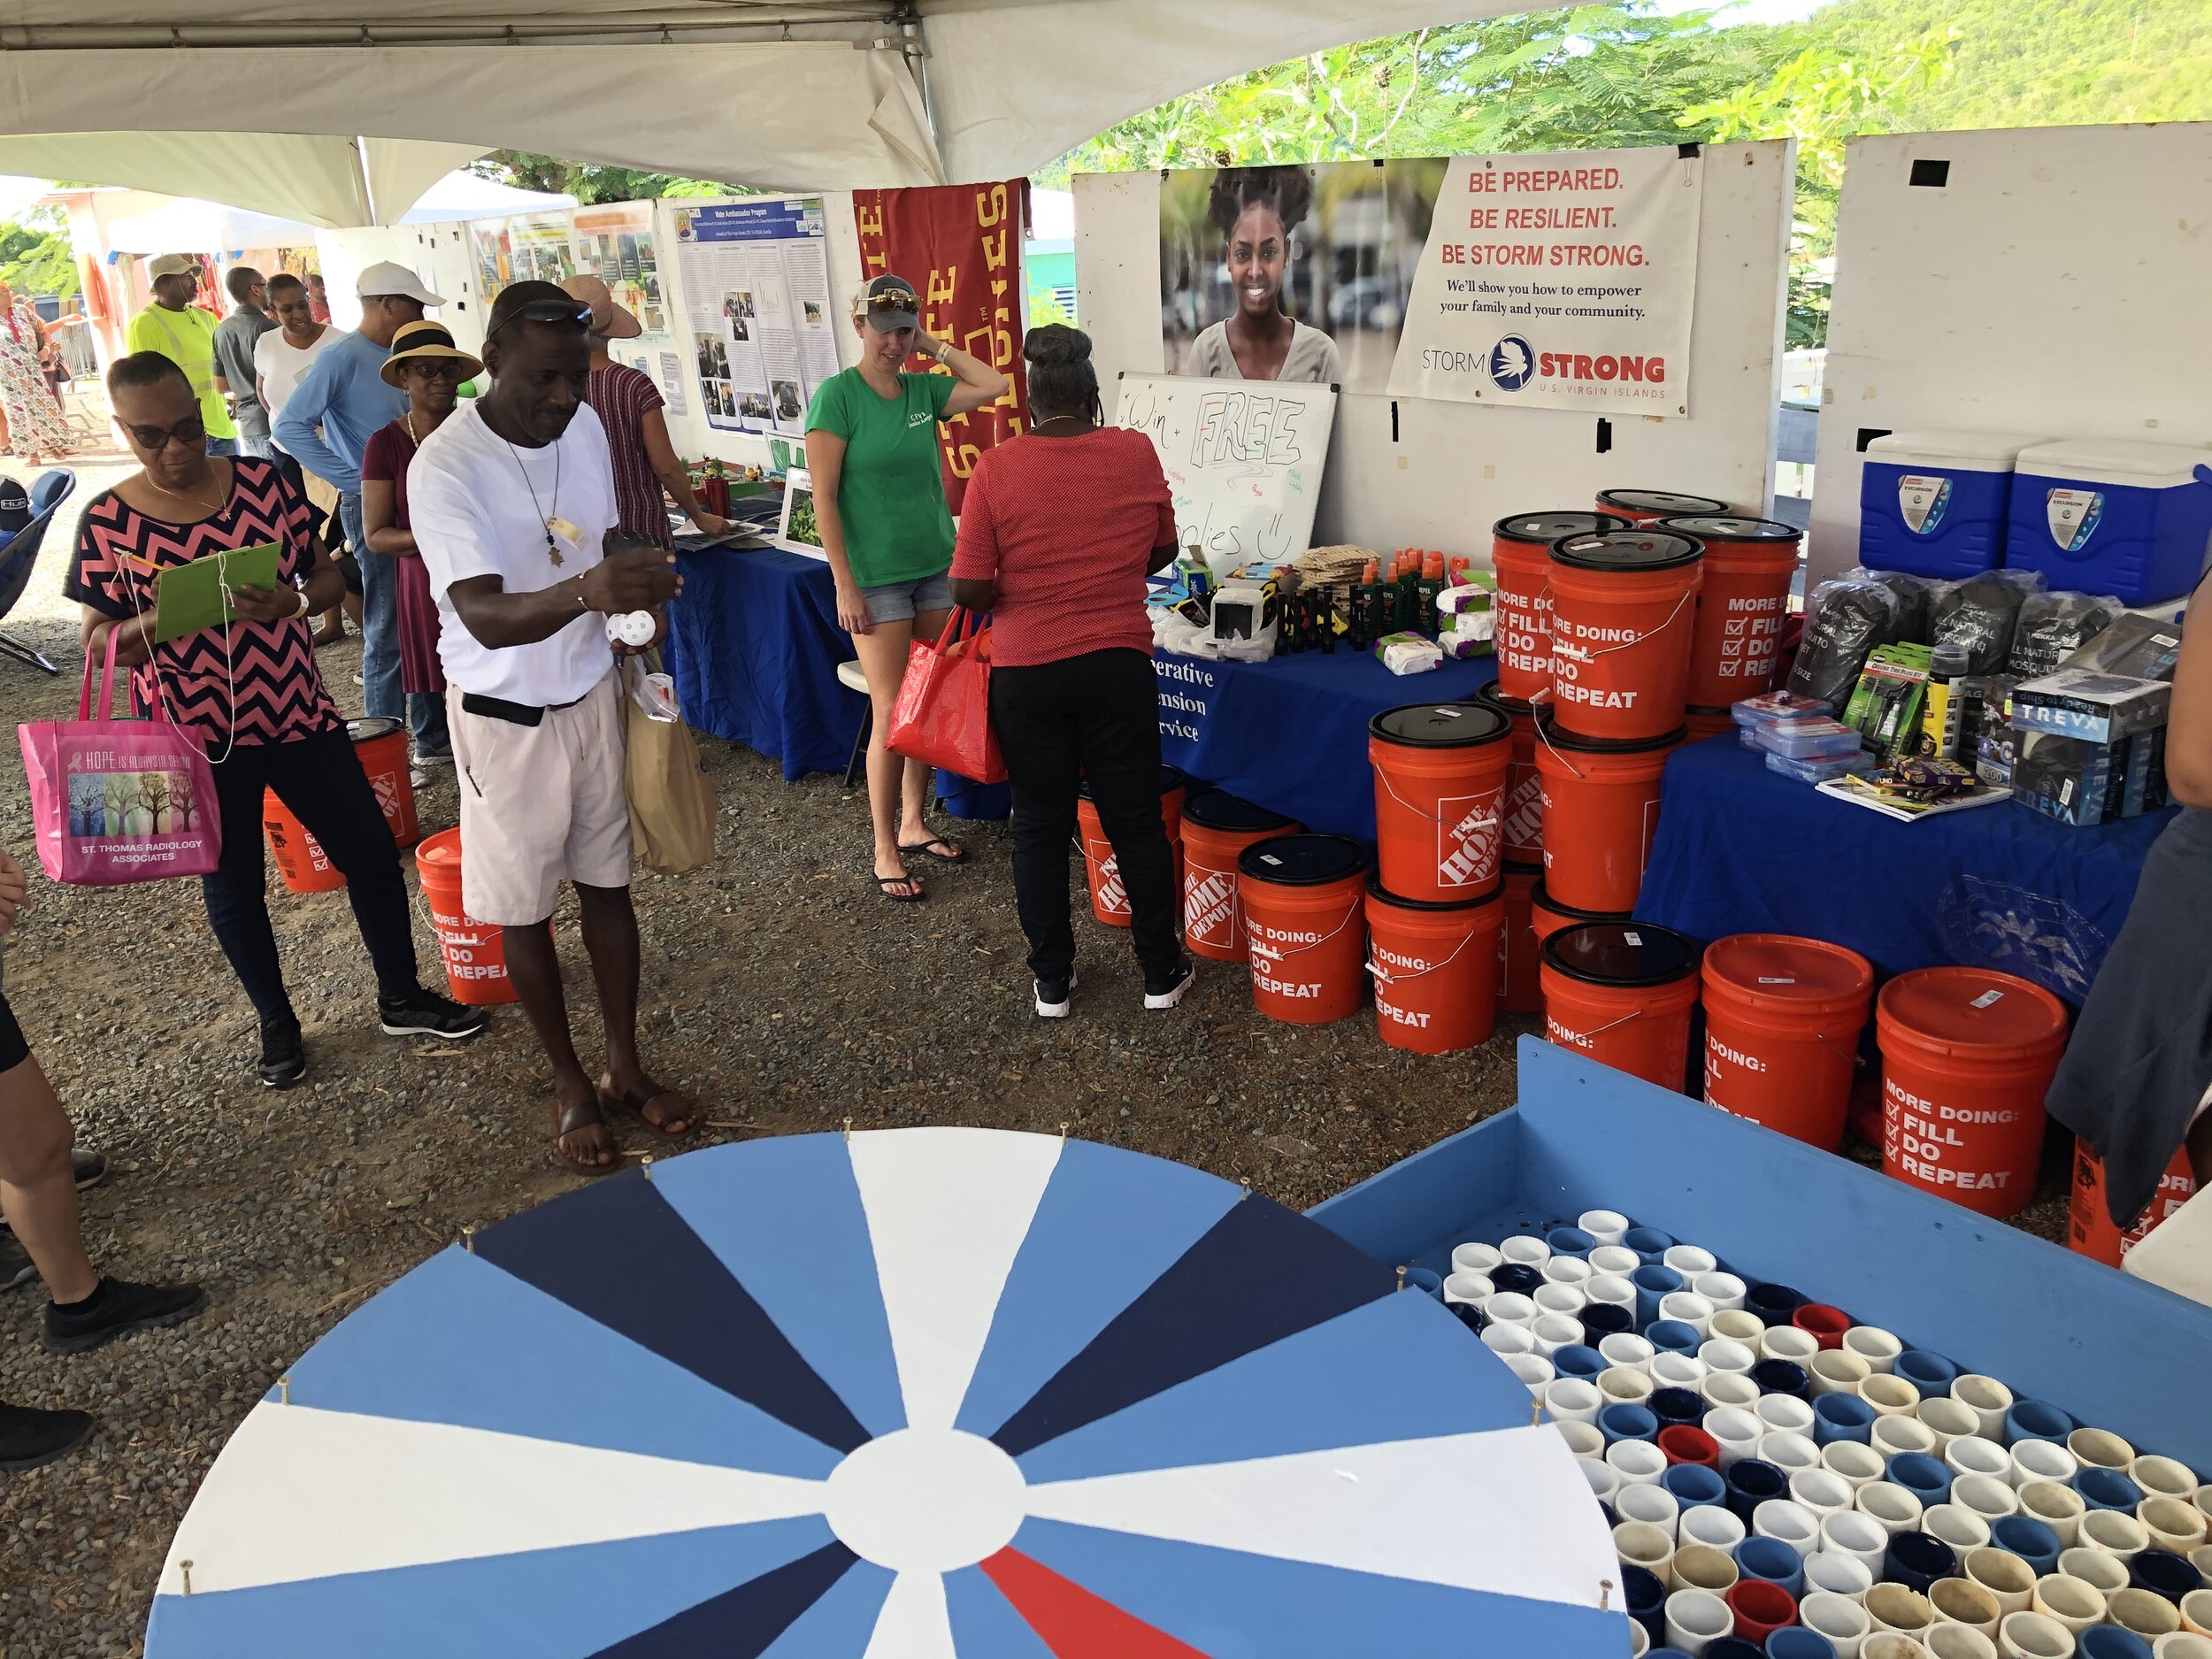  Community Foundation of the Virgin Islands (CFVI) Junior Angels Program Coordinator Caitlin Goodwin talks with a community member while others participate in carnival games for the supply distribution CTP at the 2019 St. Thomas &amp; St. John Agricu